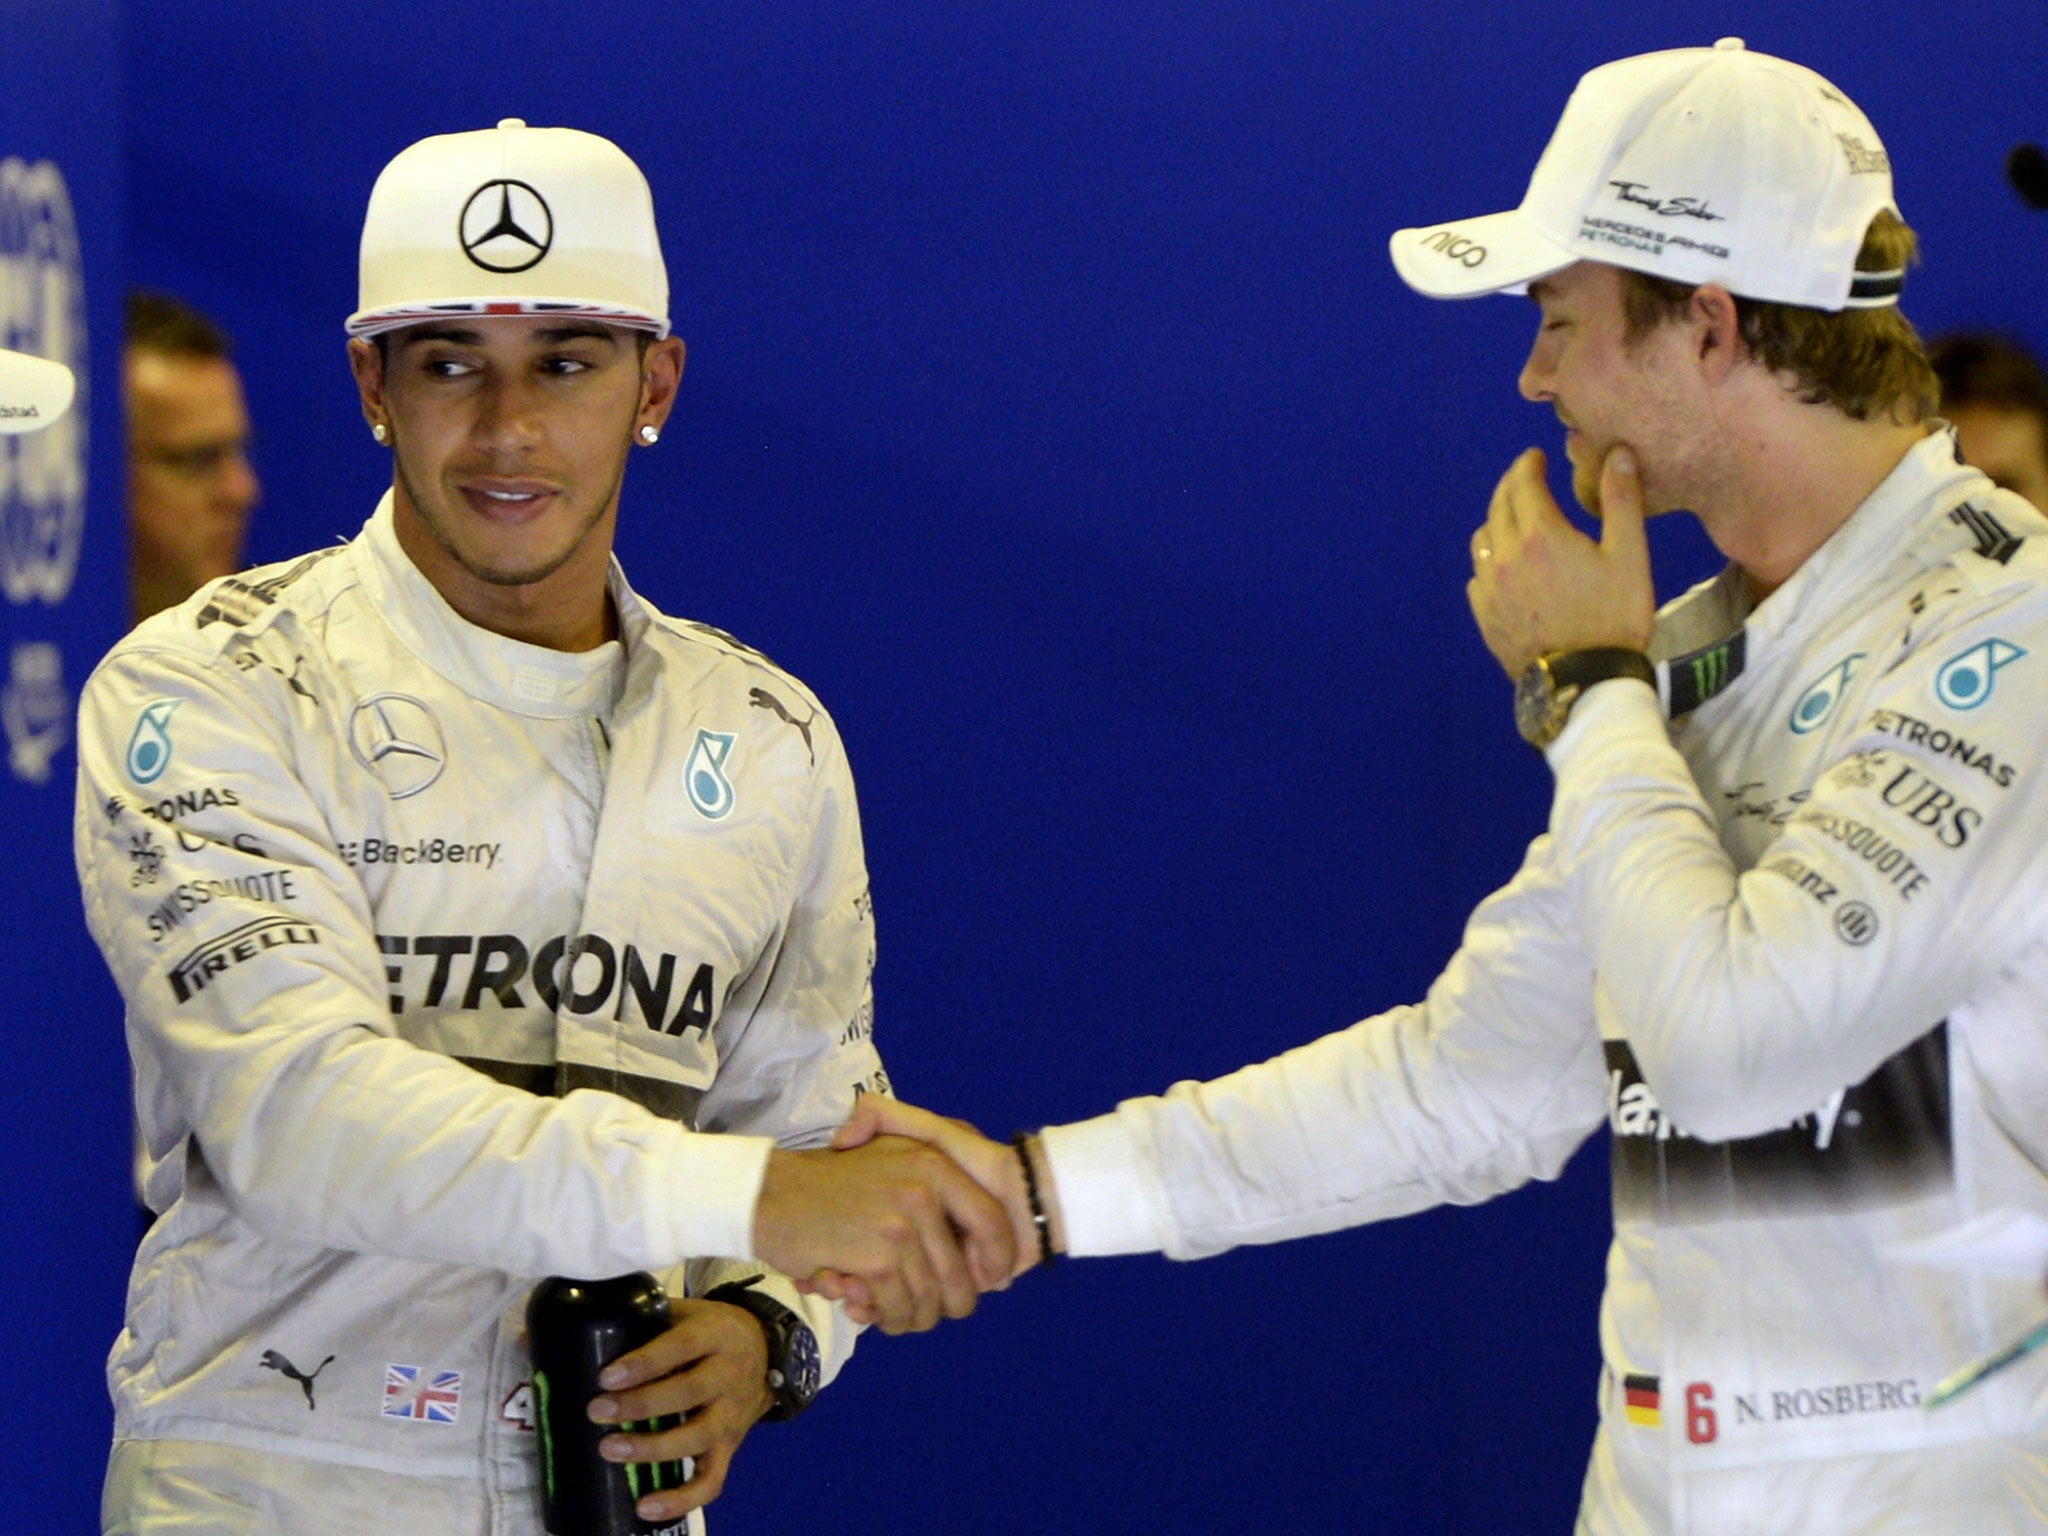 Lewis Hamilton shakes hands with Nico Rosberg as the two share a smile